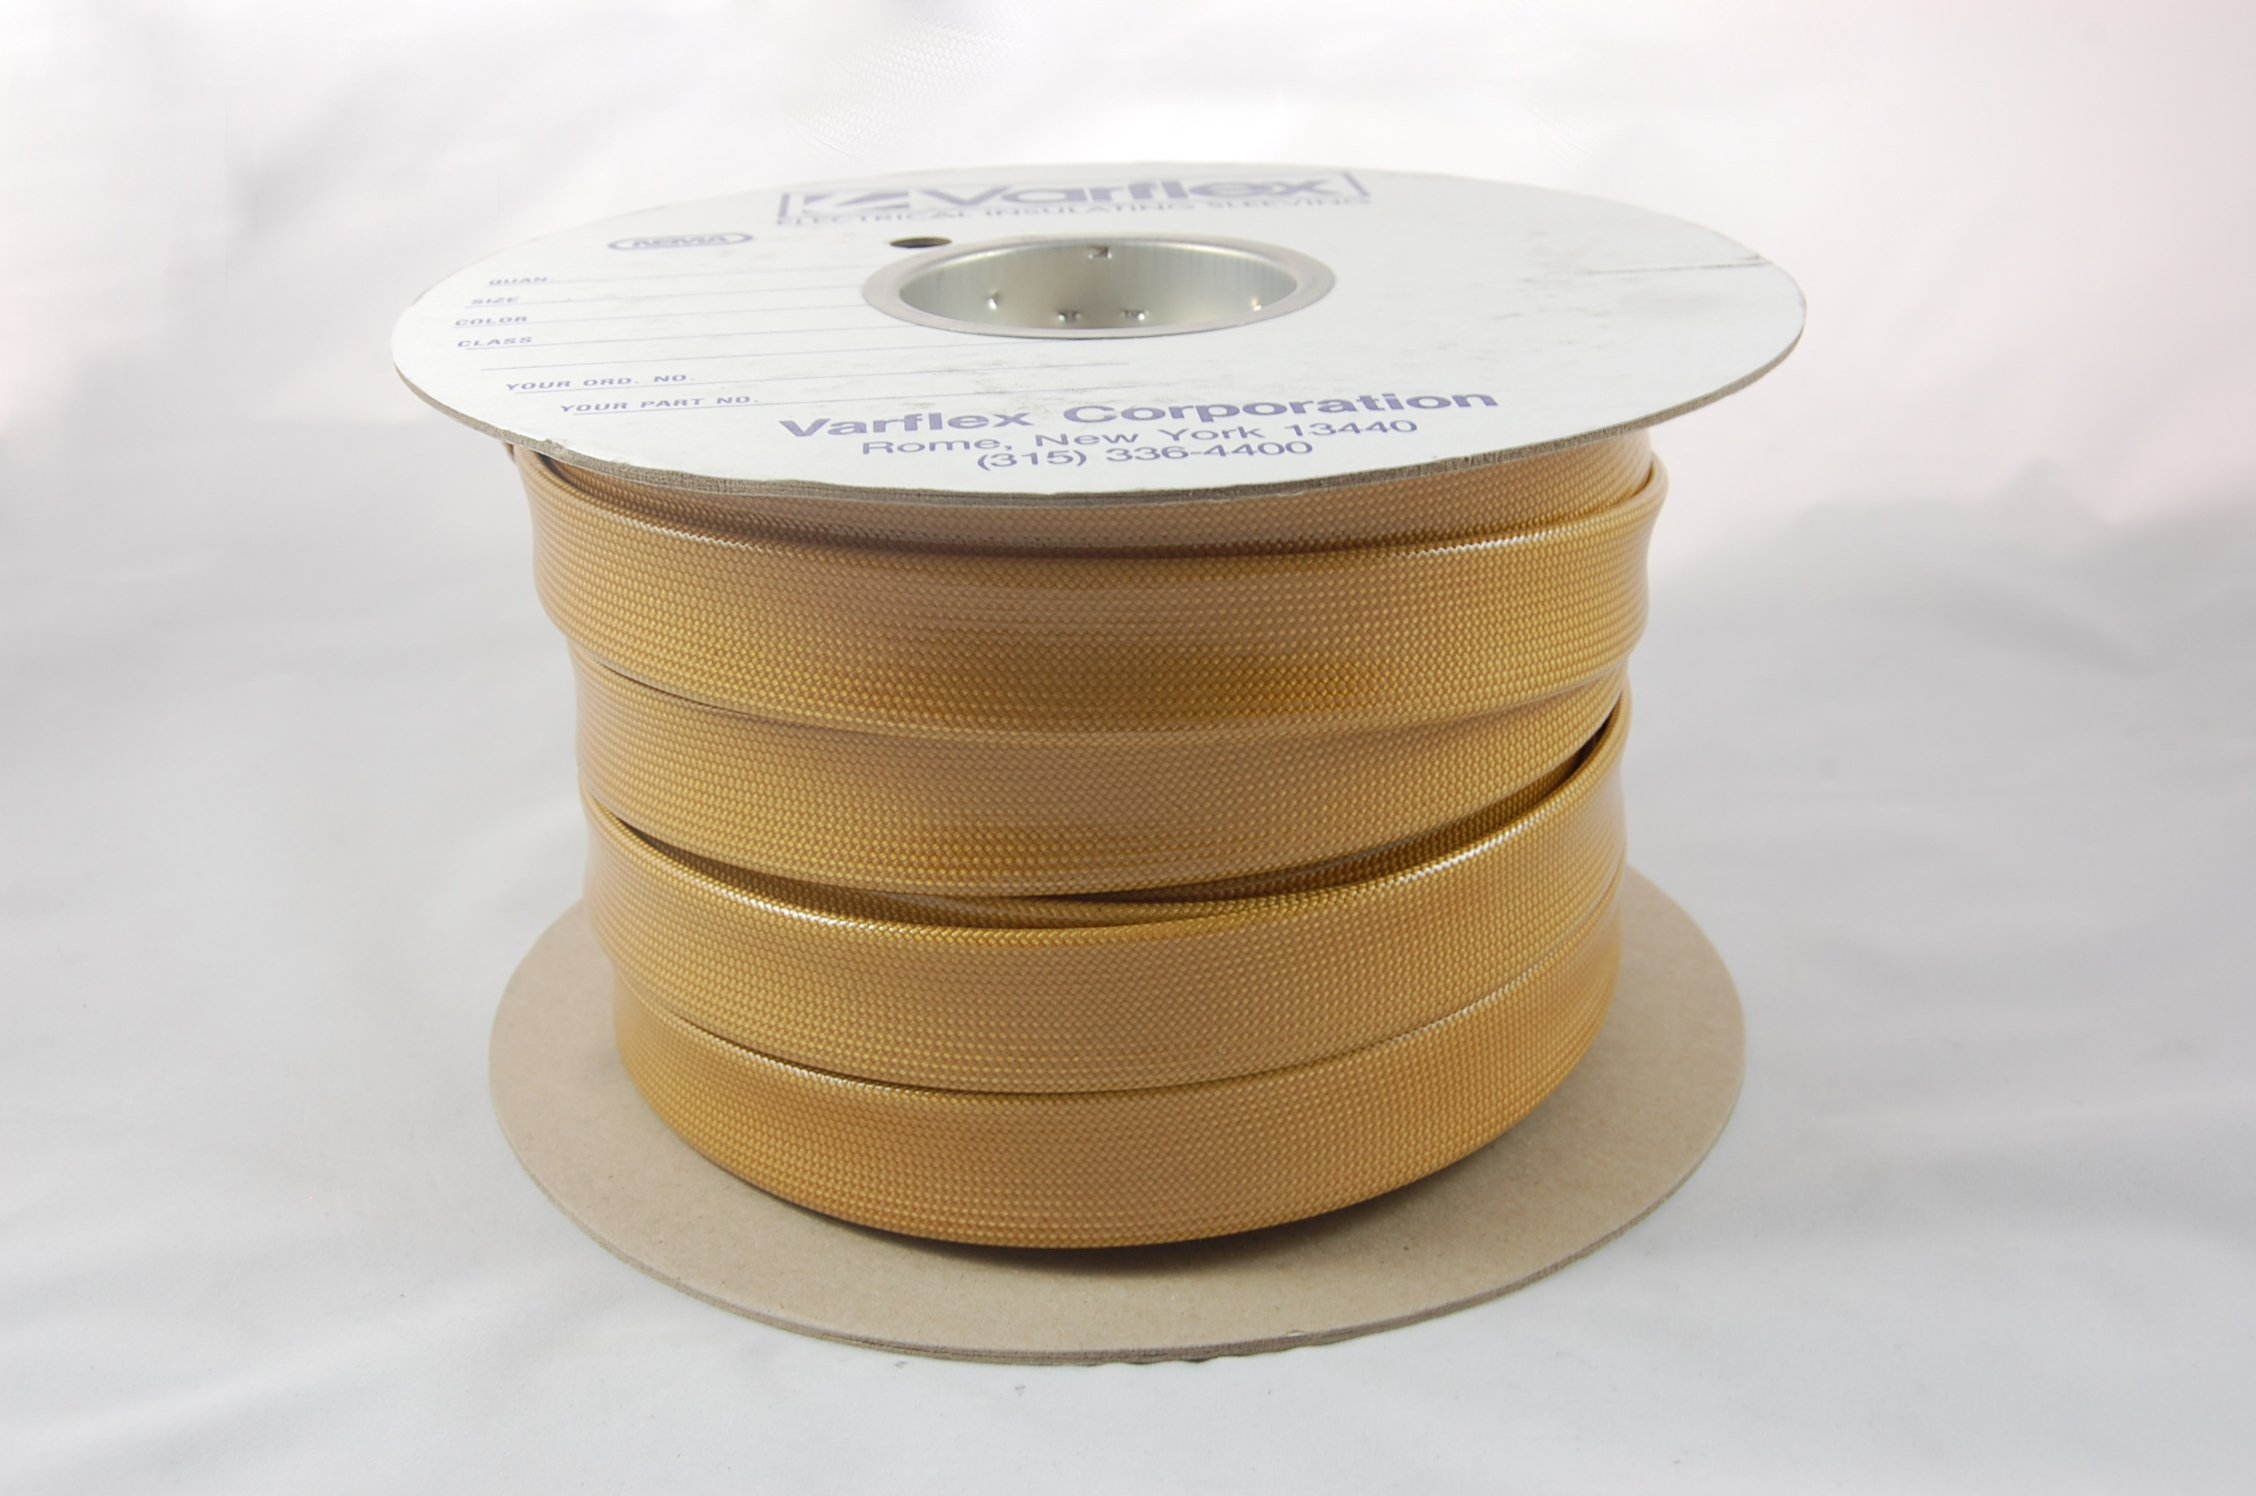 #11 AWG Varglas Silicone Resin 500 Grade H-C-1 (2500V) High Temperature Silicone Resin Coated Braided Fiberglass Sleeving 200°C, natural, 150 FT per spool